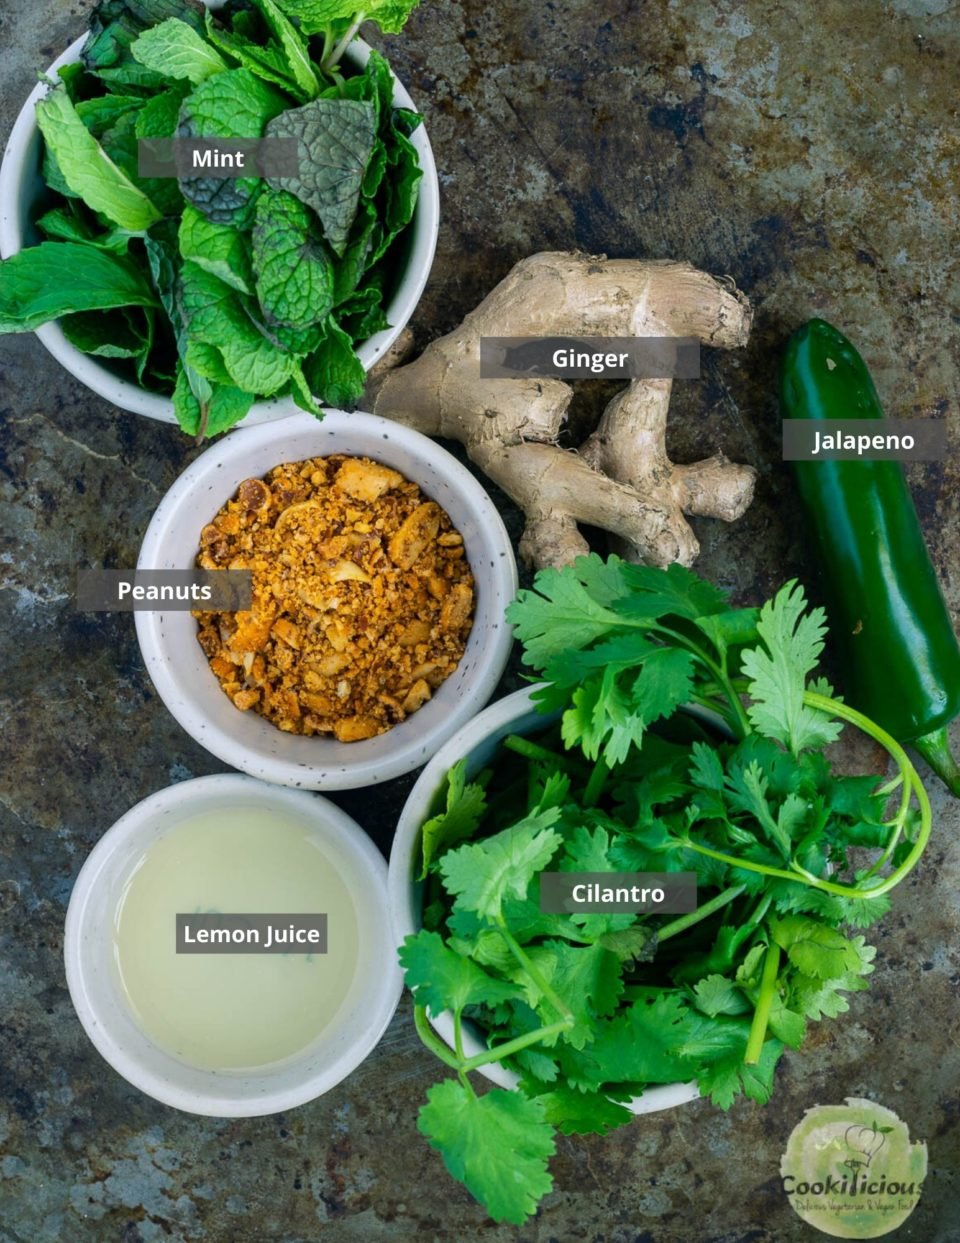 all the ingredients needed to make Mint Cilantro Chutney placed in a tray